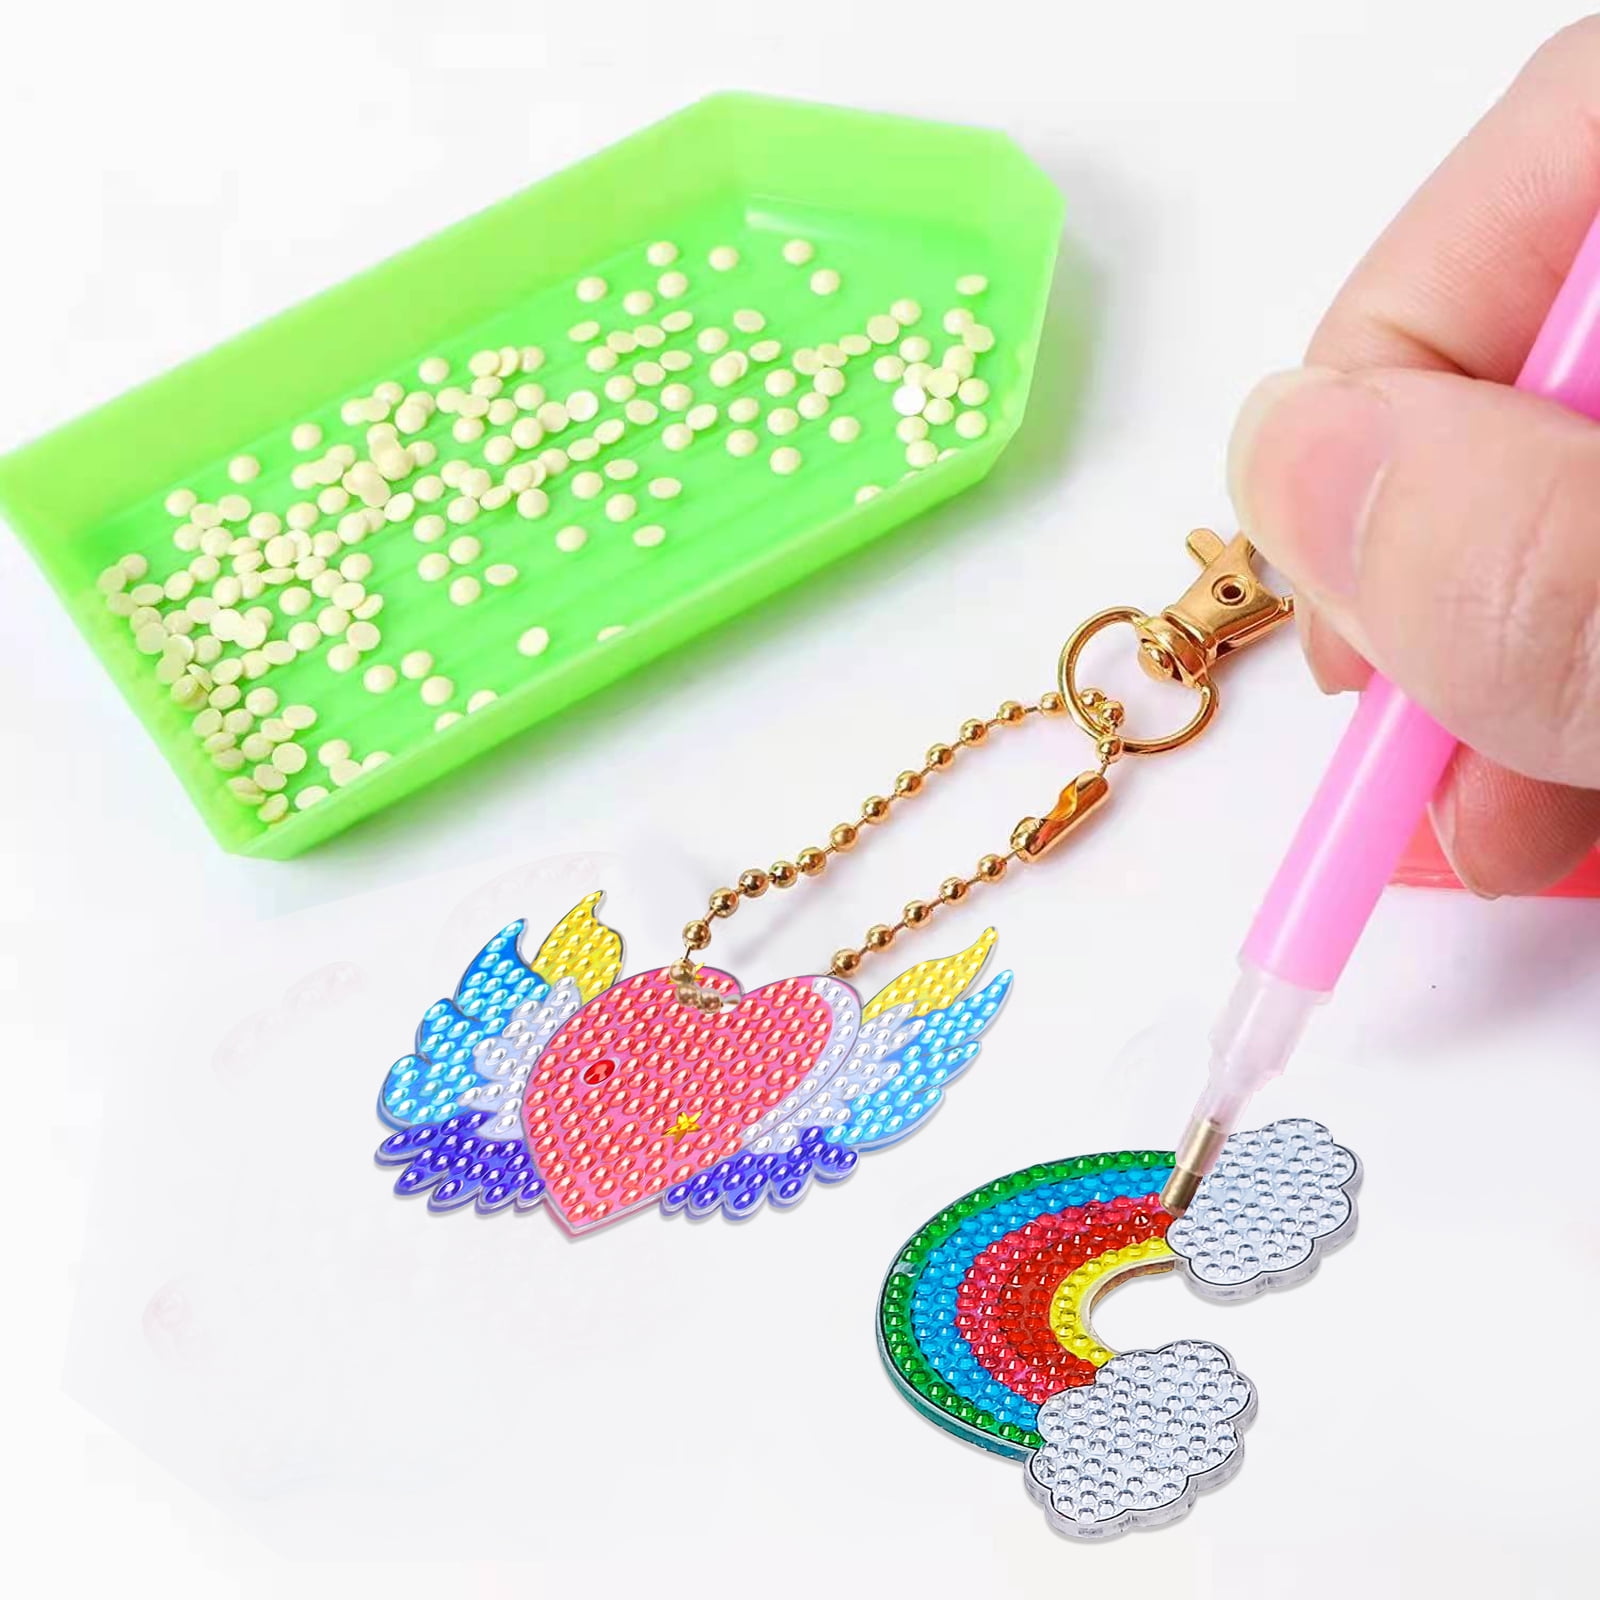 JRD&BS WINL Resin Charm Keychain Kit diy cute Girl Toys Art Supplies Crafts  for Girls Age 6-12 Key Chains Pendant for Kids Adults